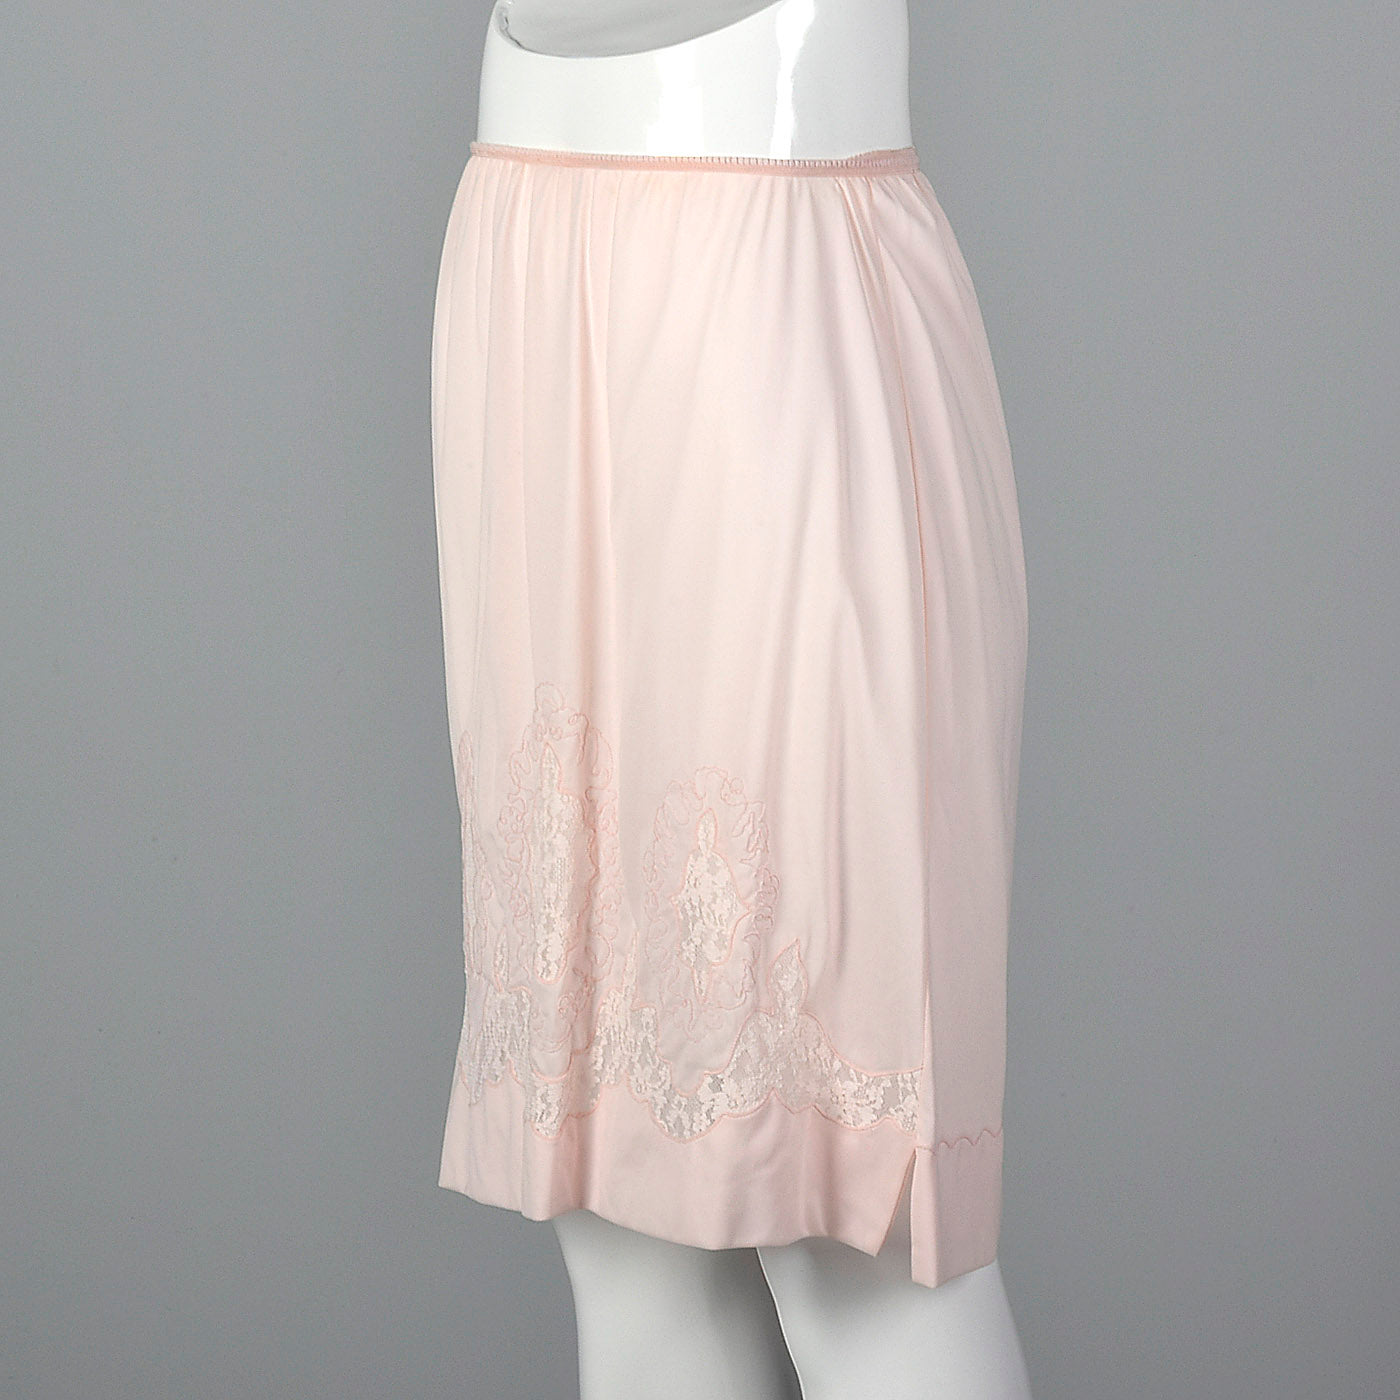 1950s Pastel Pink Half Slip with Lace and Soutache